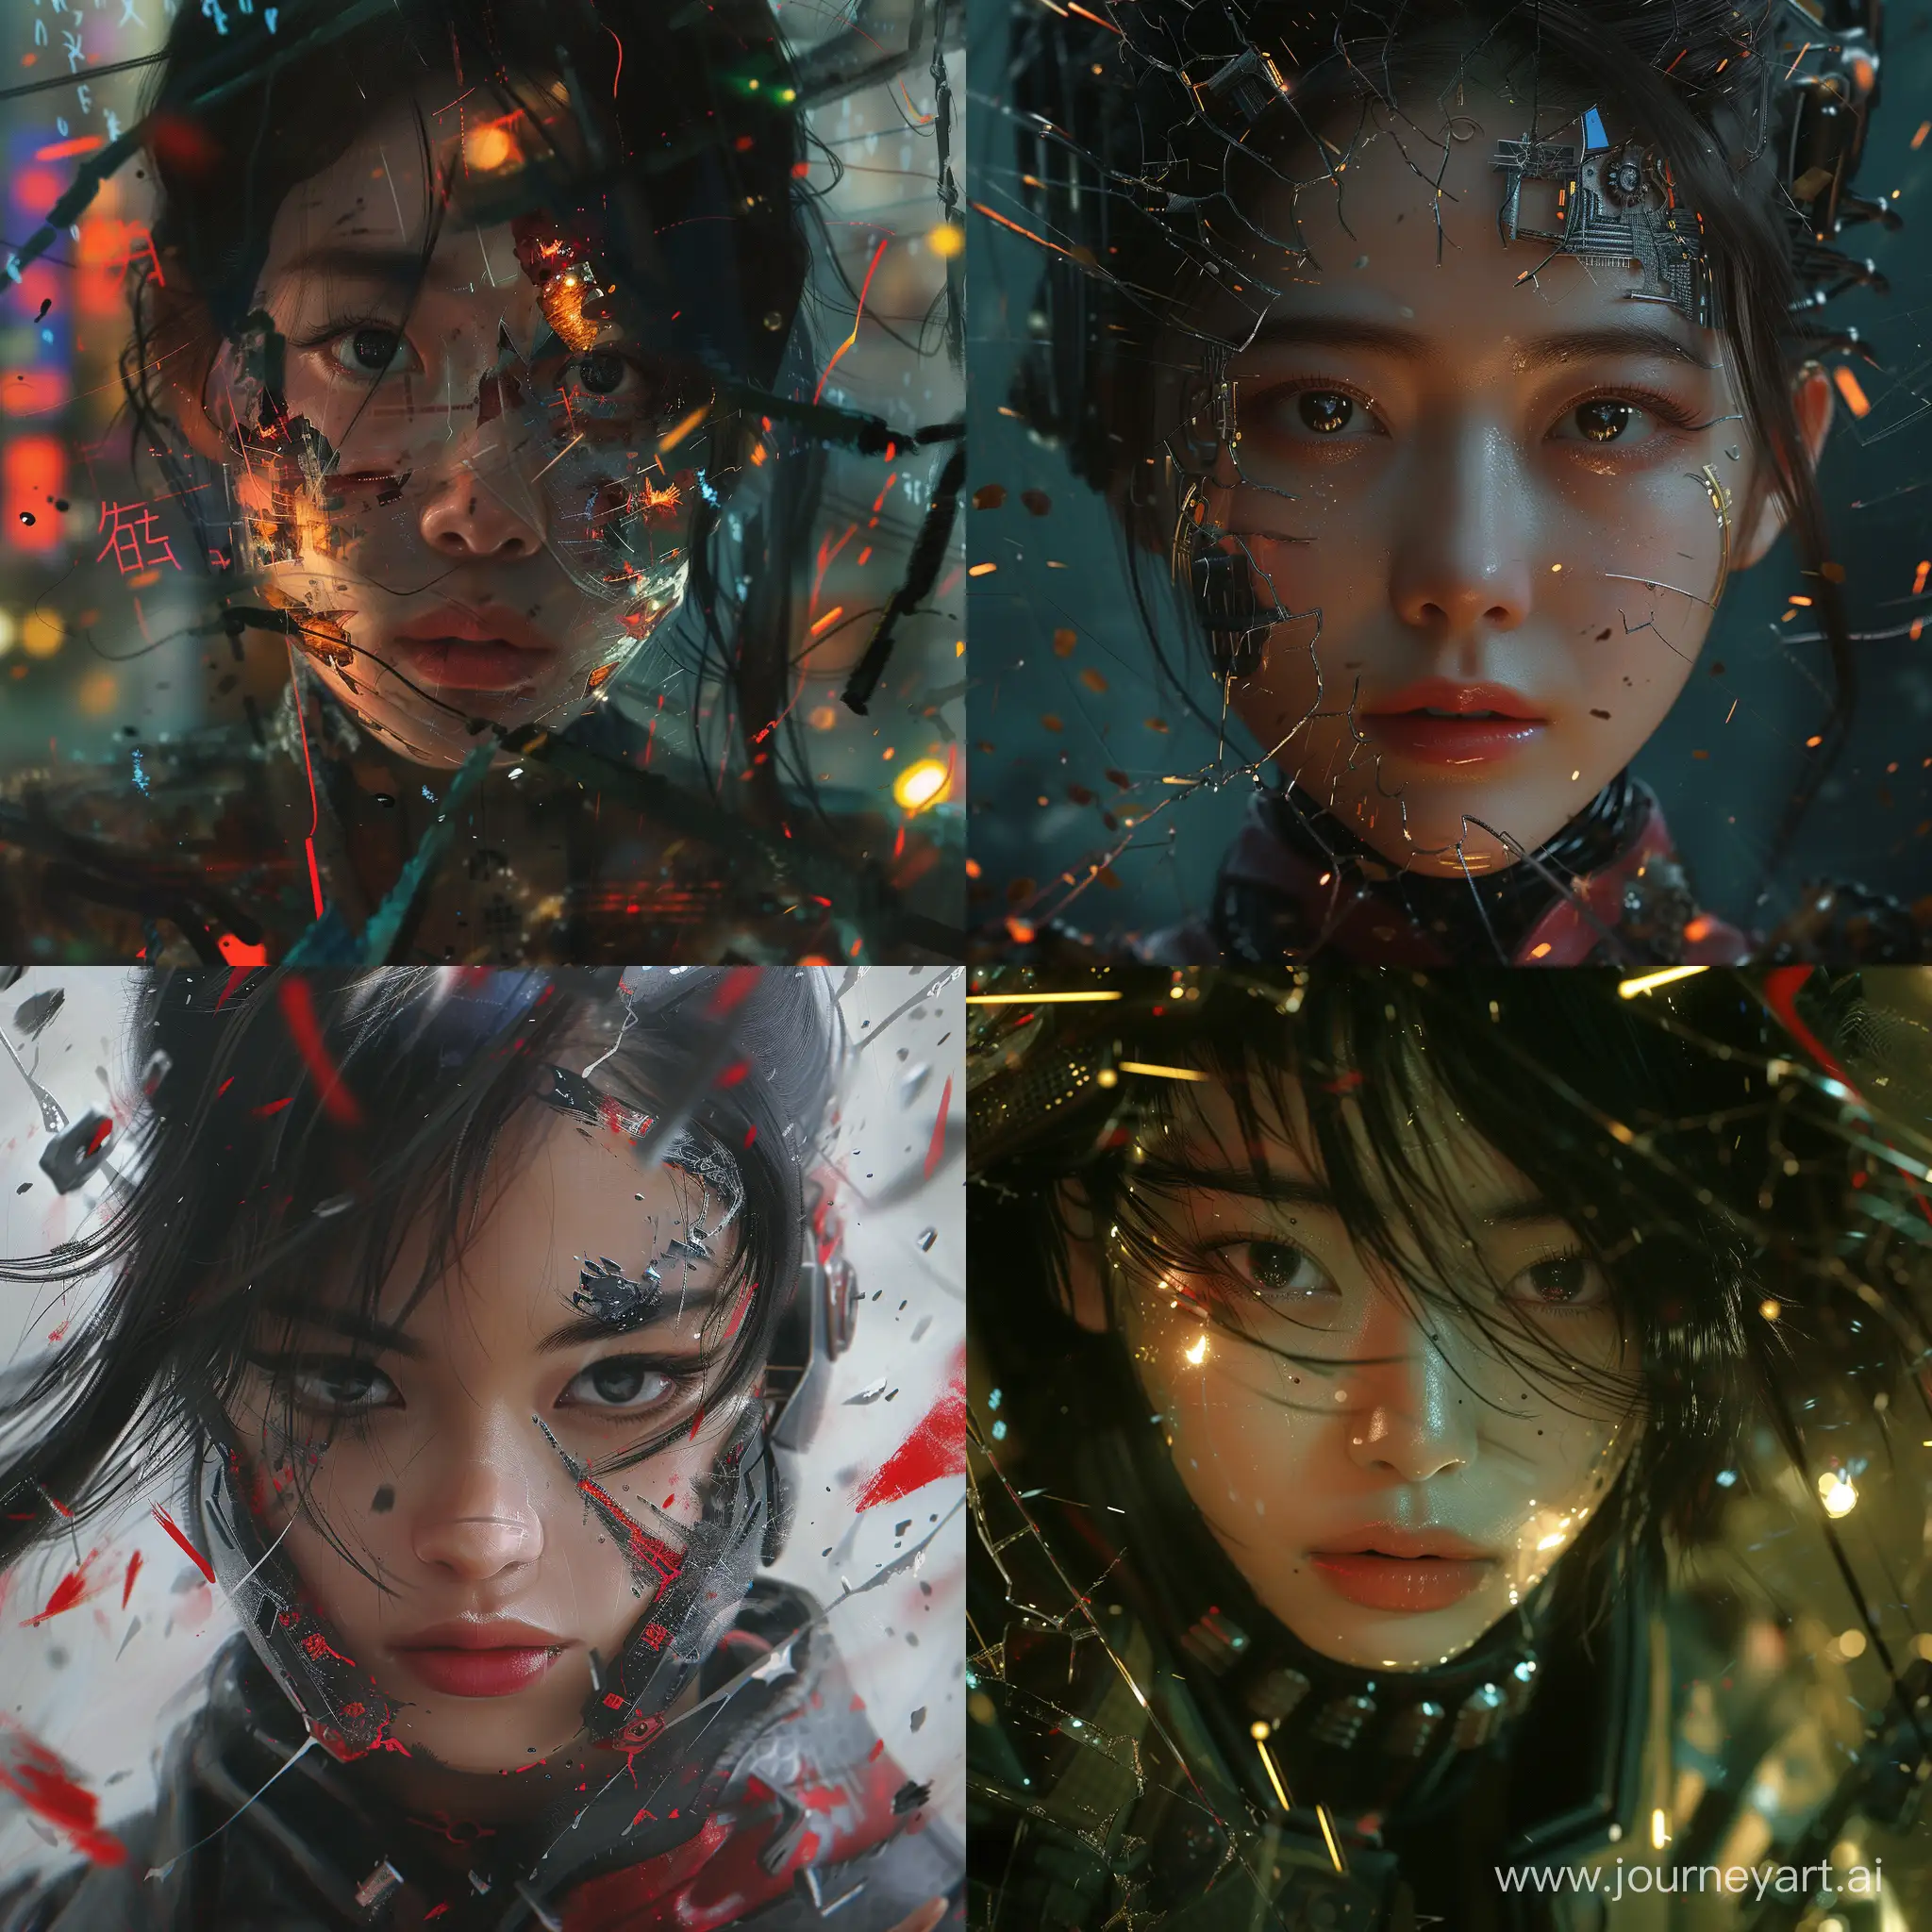 A thrilling portrait of asian girl around breaking downs warld powerful action, intense emotion, captivating details, Traditional aesthetics blend with cyberpunk elements